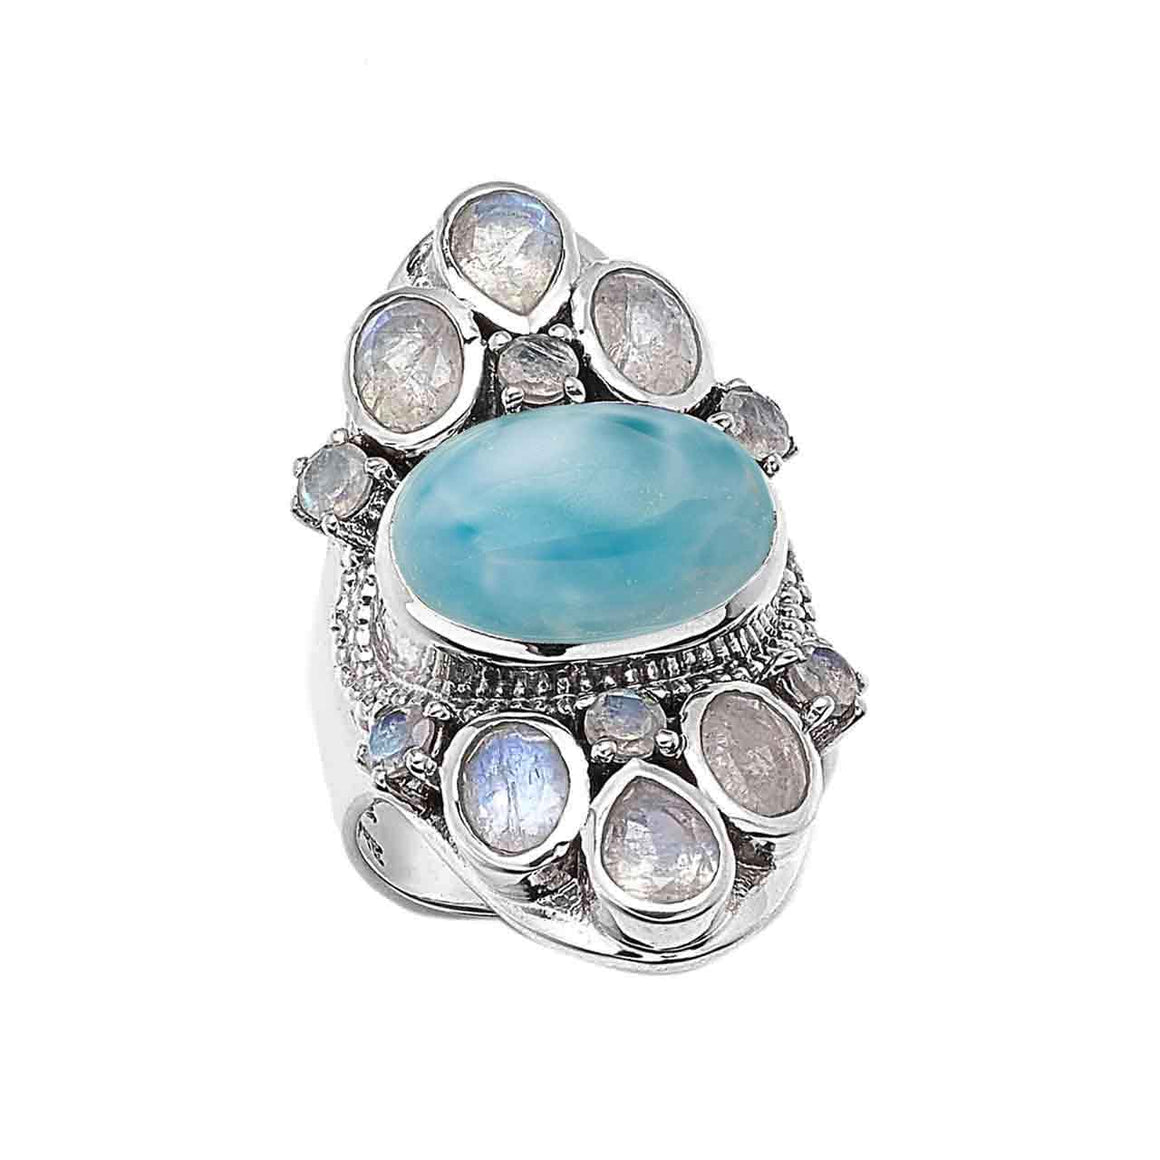 Larimar and Faceted Rainbow Moonstone Gemstone Ring